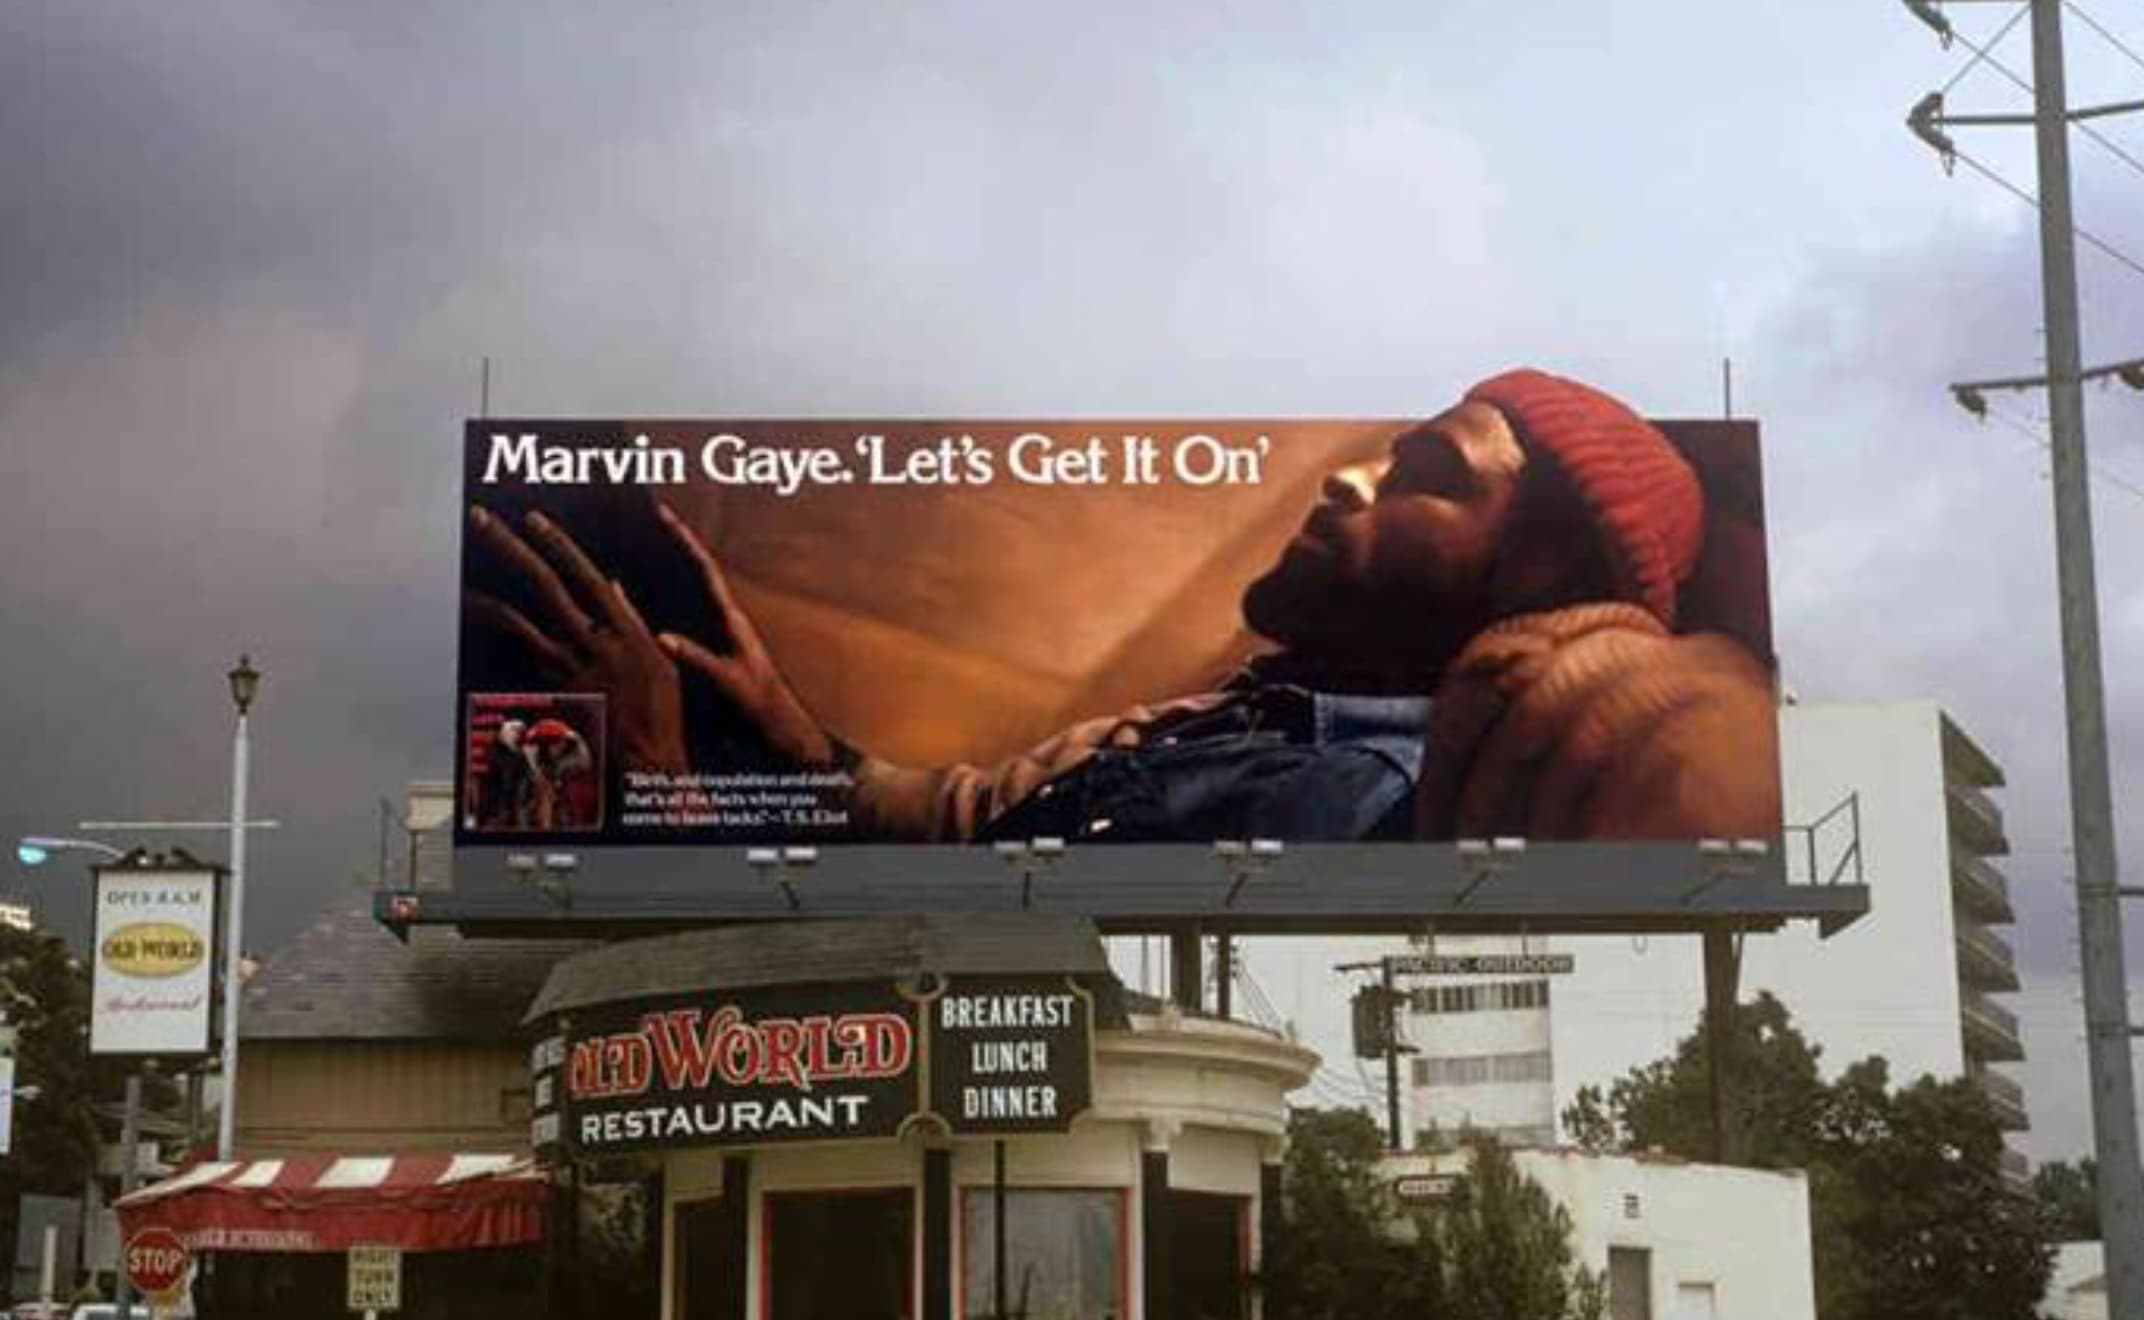 1980s billboards - Marvin Gaye.'Let's Get It On' Oper Aam Old World Breakfast Ald World Lunch Restaurant Dinner Stop Might Tjwn Only Cites